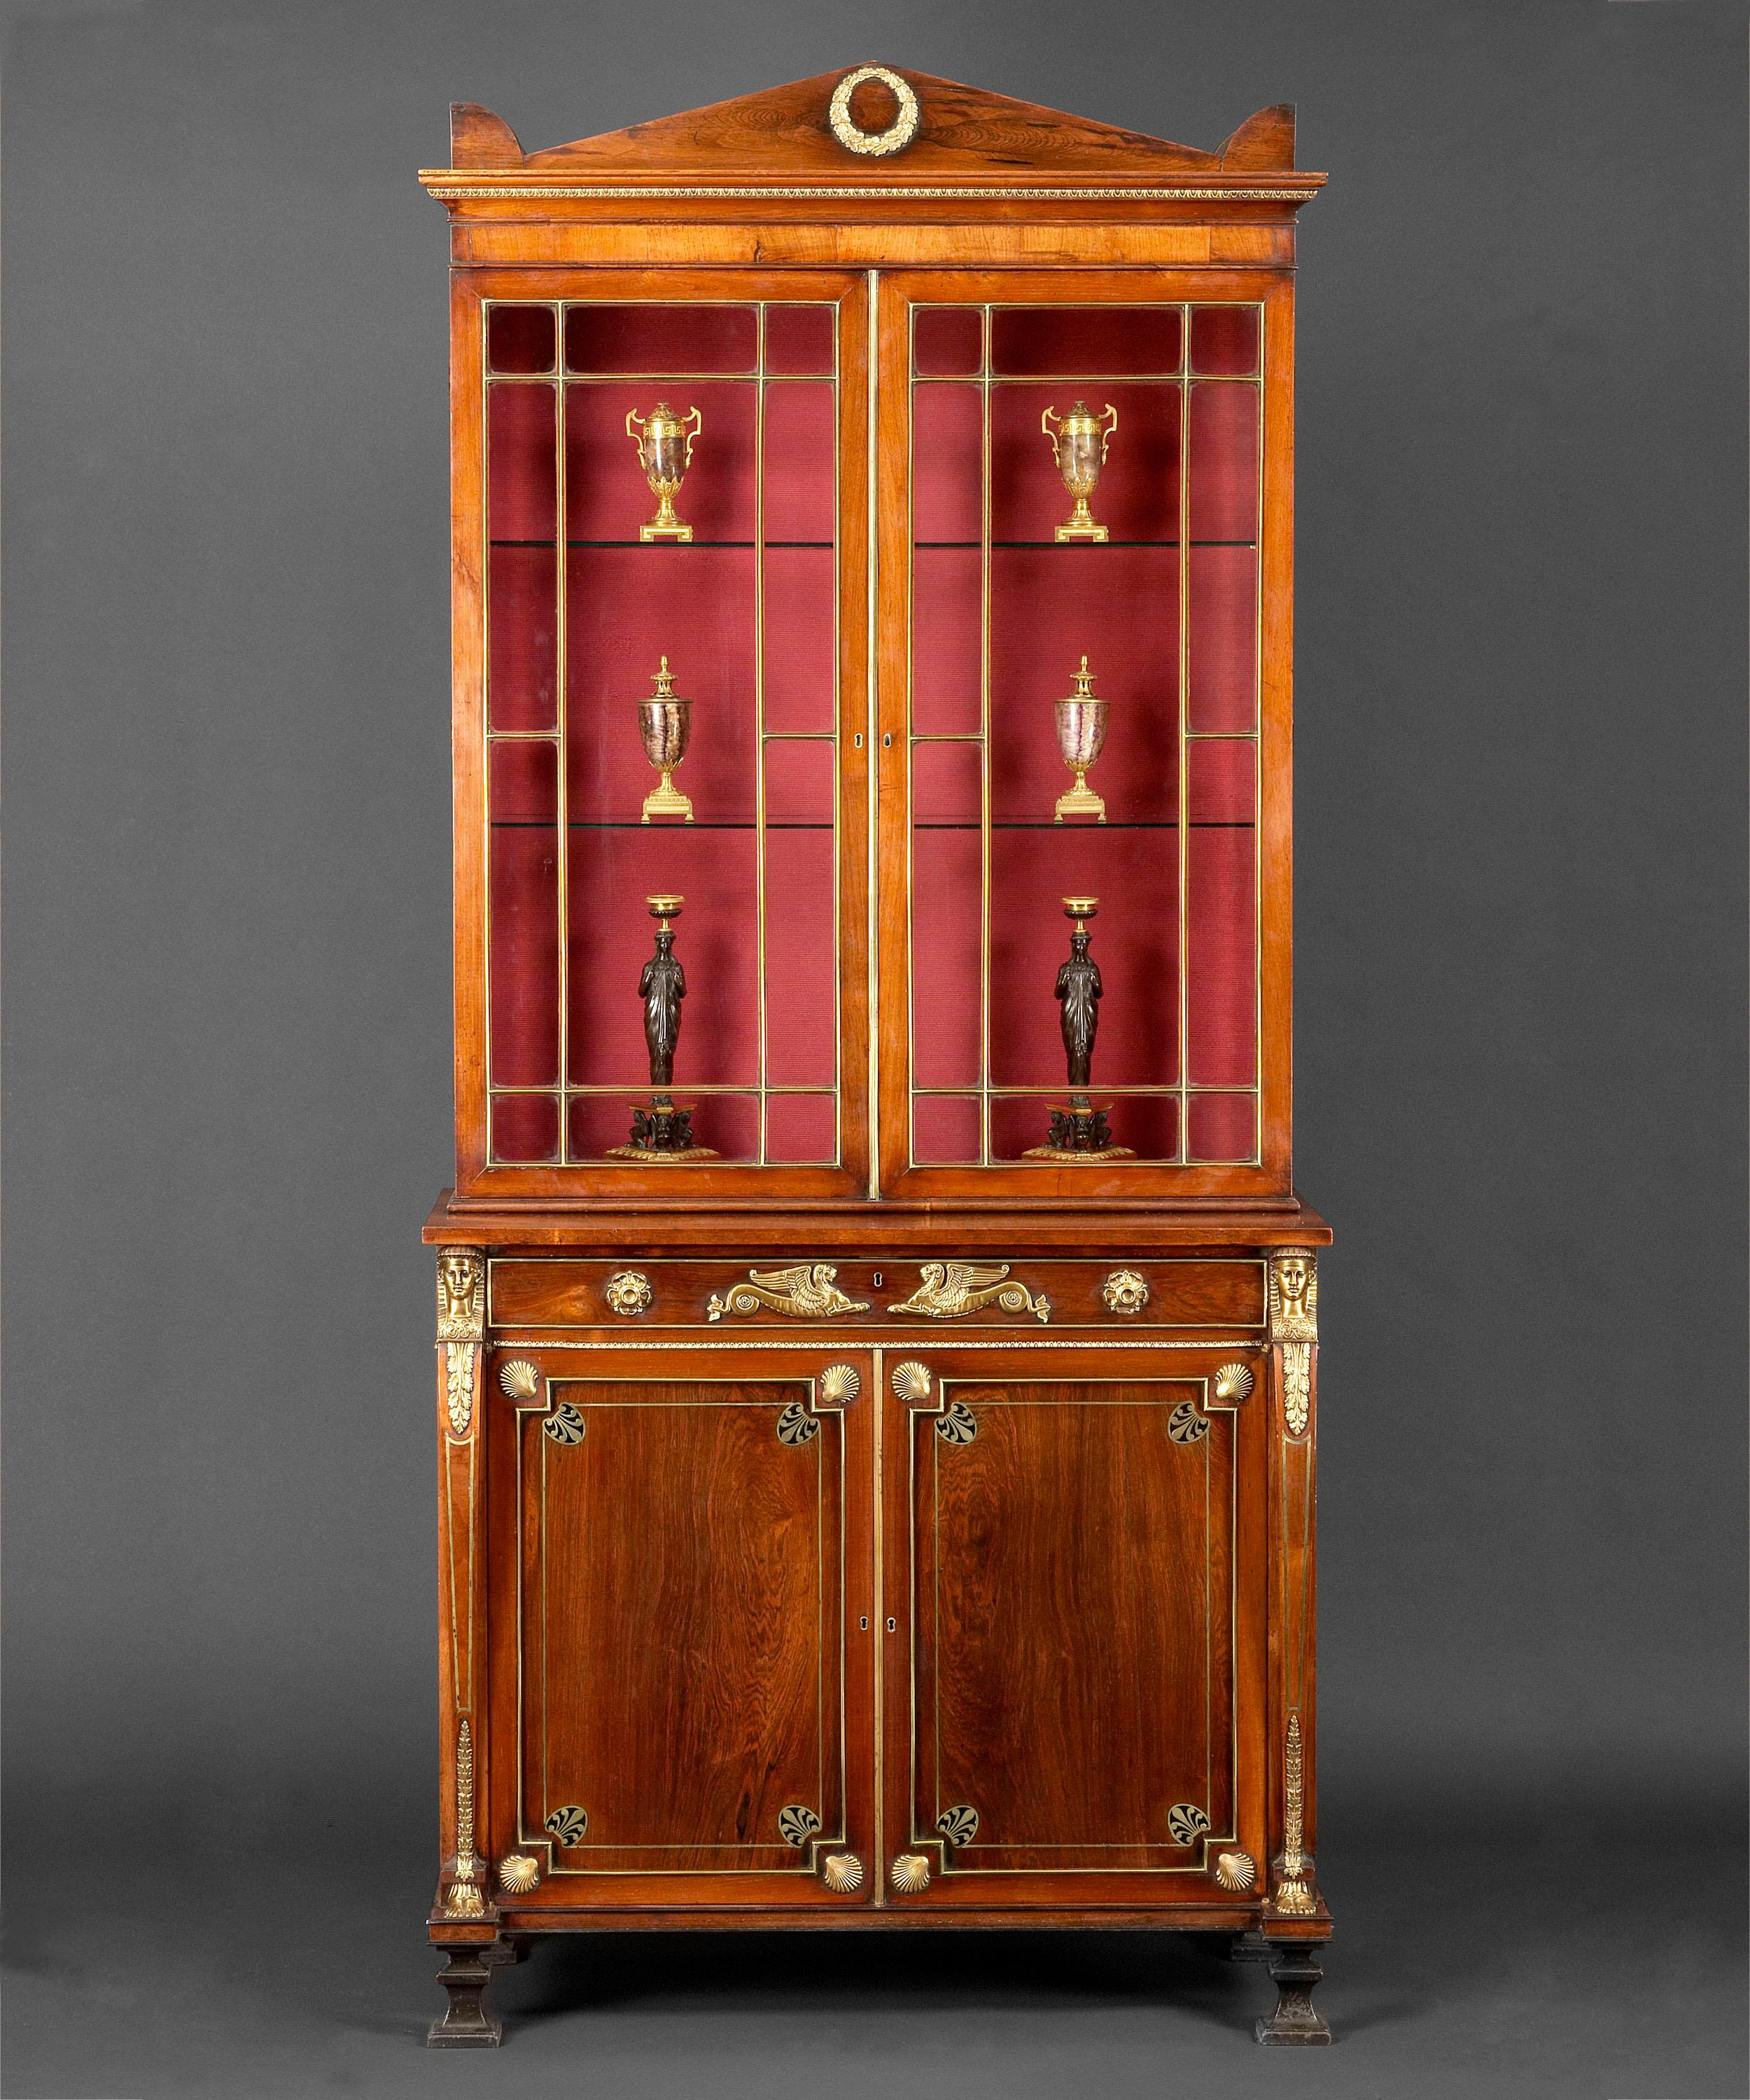 Early 19th Century Regency Period Rosewood and Ormolu Mounted Secretaire Cabinet In Good Condition For Sale In Bradford on Avon, GB